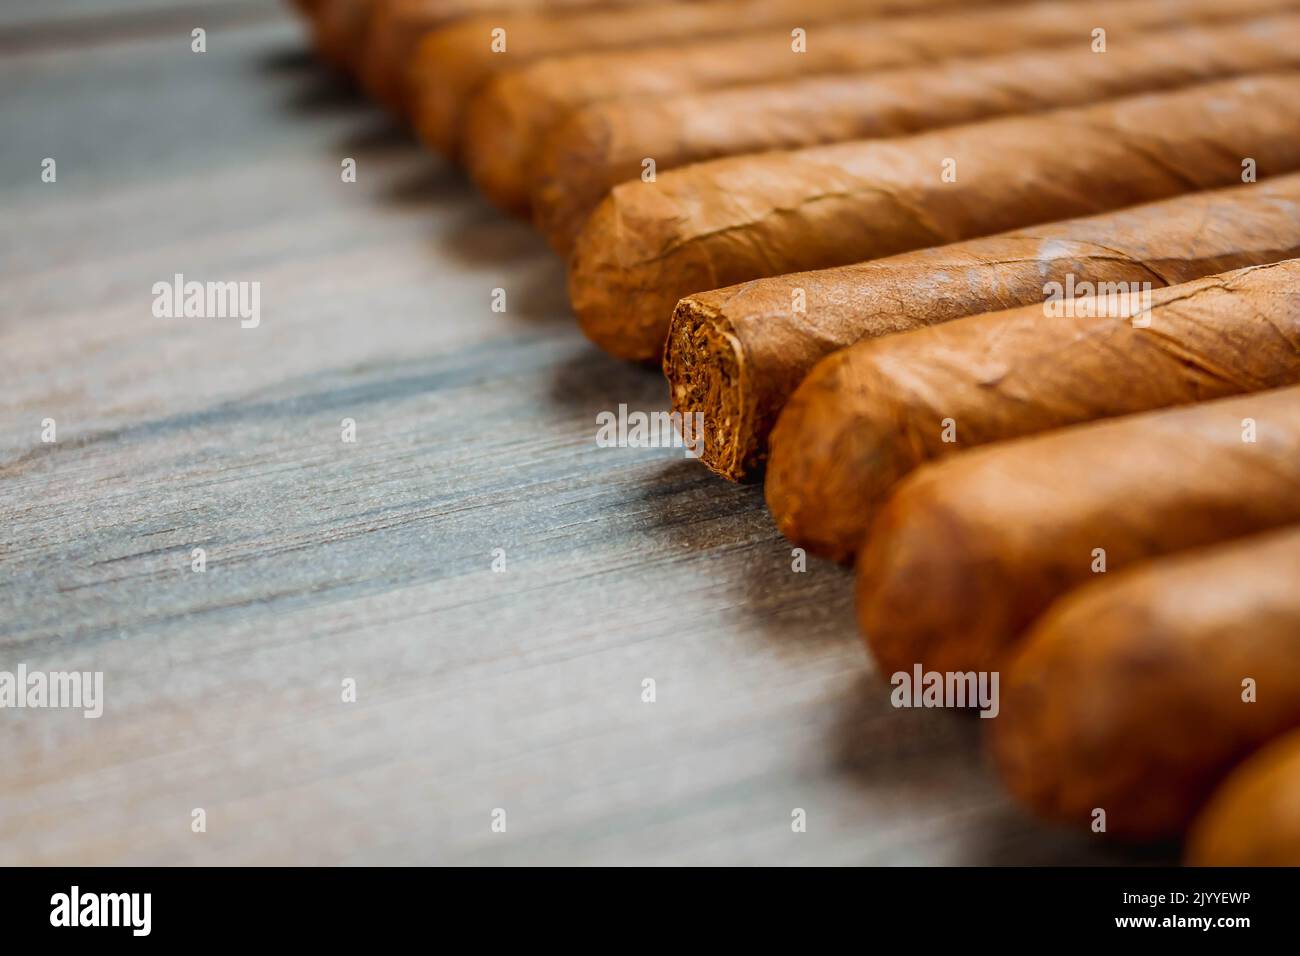 Cuban cigars on rustic wooden table in line on the edge of background. Stock Photo